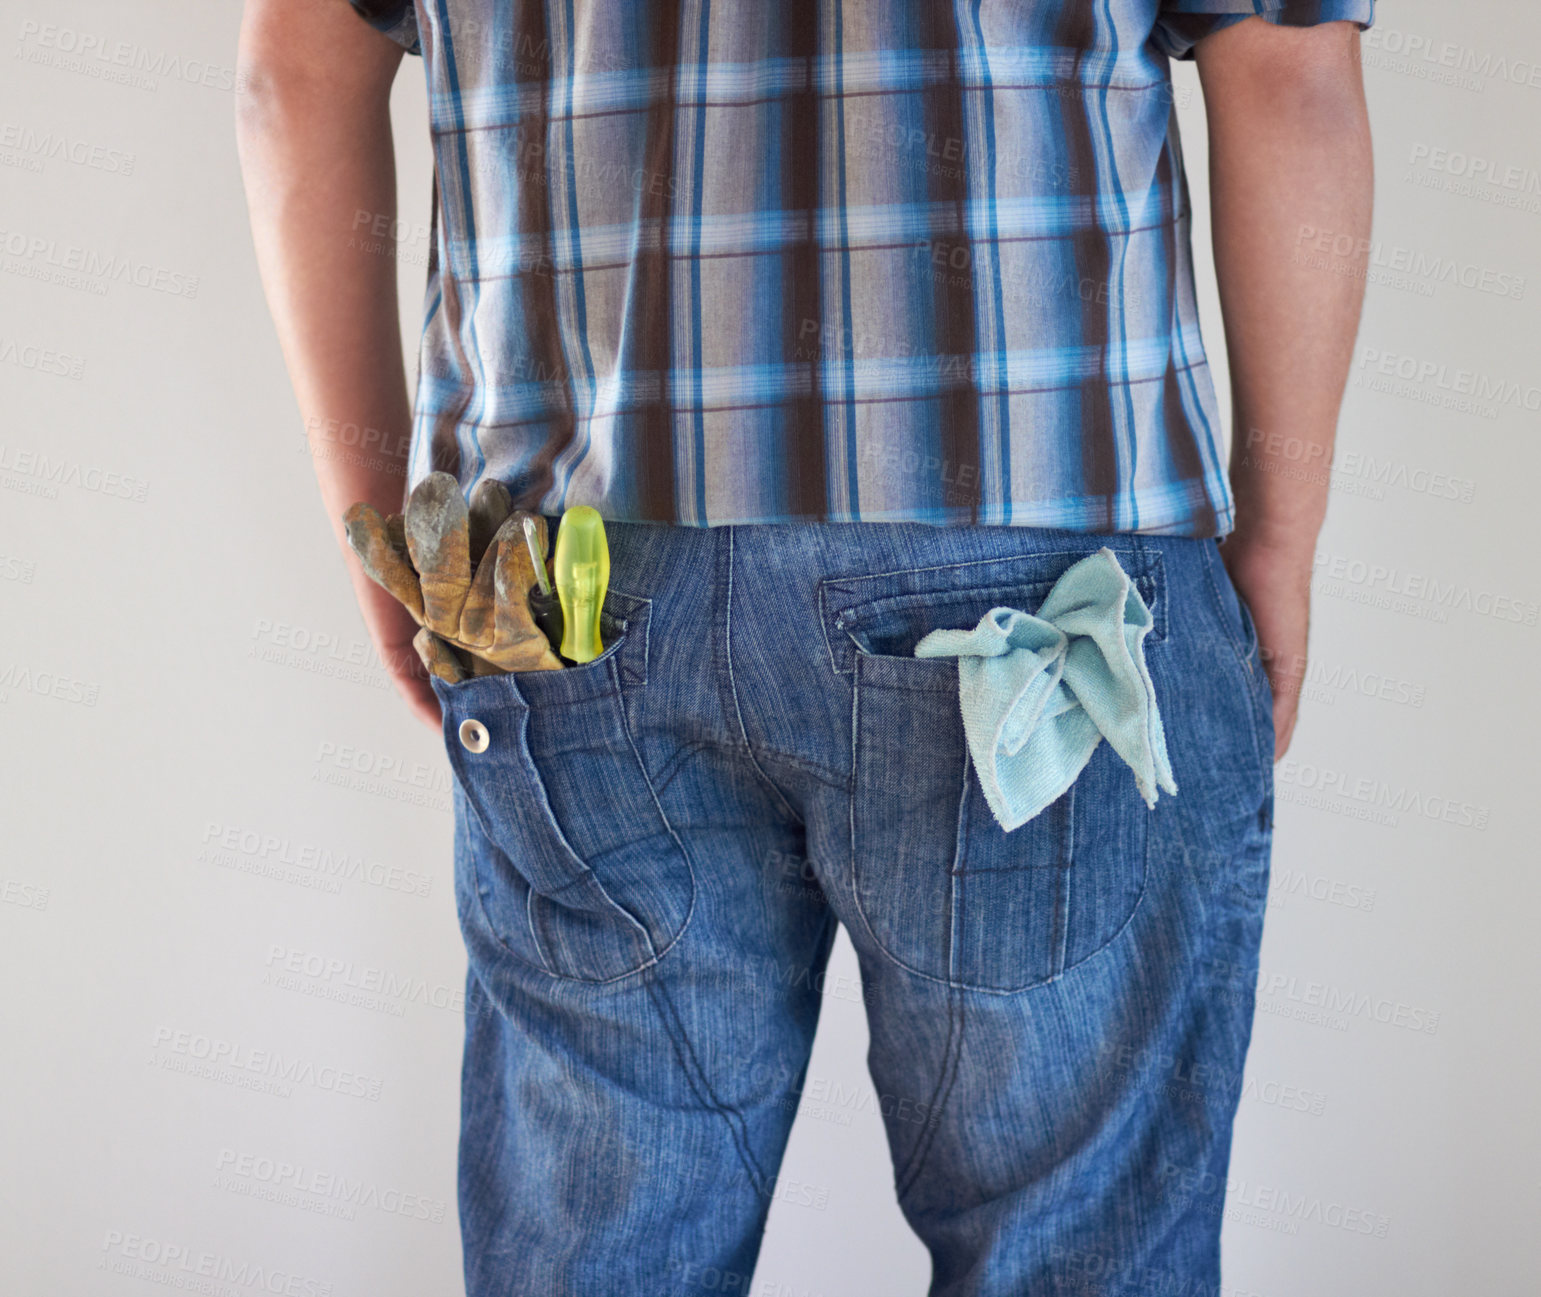 Buy stock photo Handyman, contractor and back of builder jeans with tools, gloves and house work. Construction worker, carpenter person or building maintenance man ready for professional and home repair project